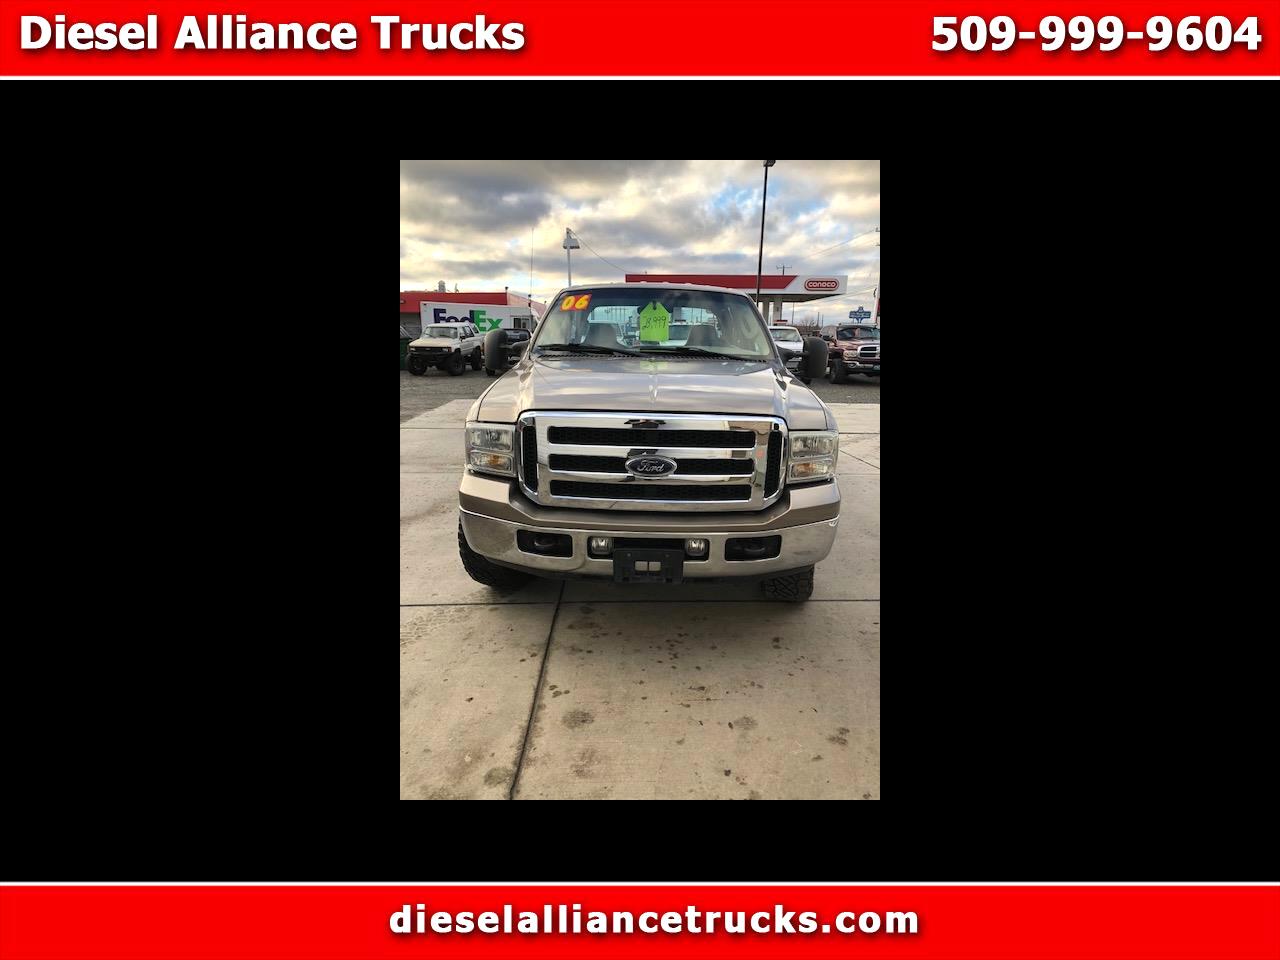 Ford F-350 SD XLT Crew Cab Long Bed 4WD 2006